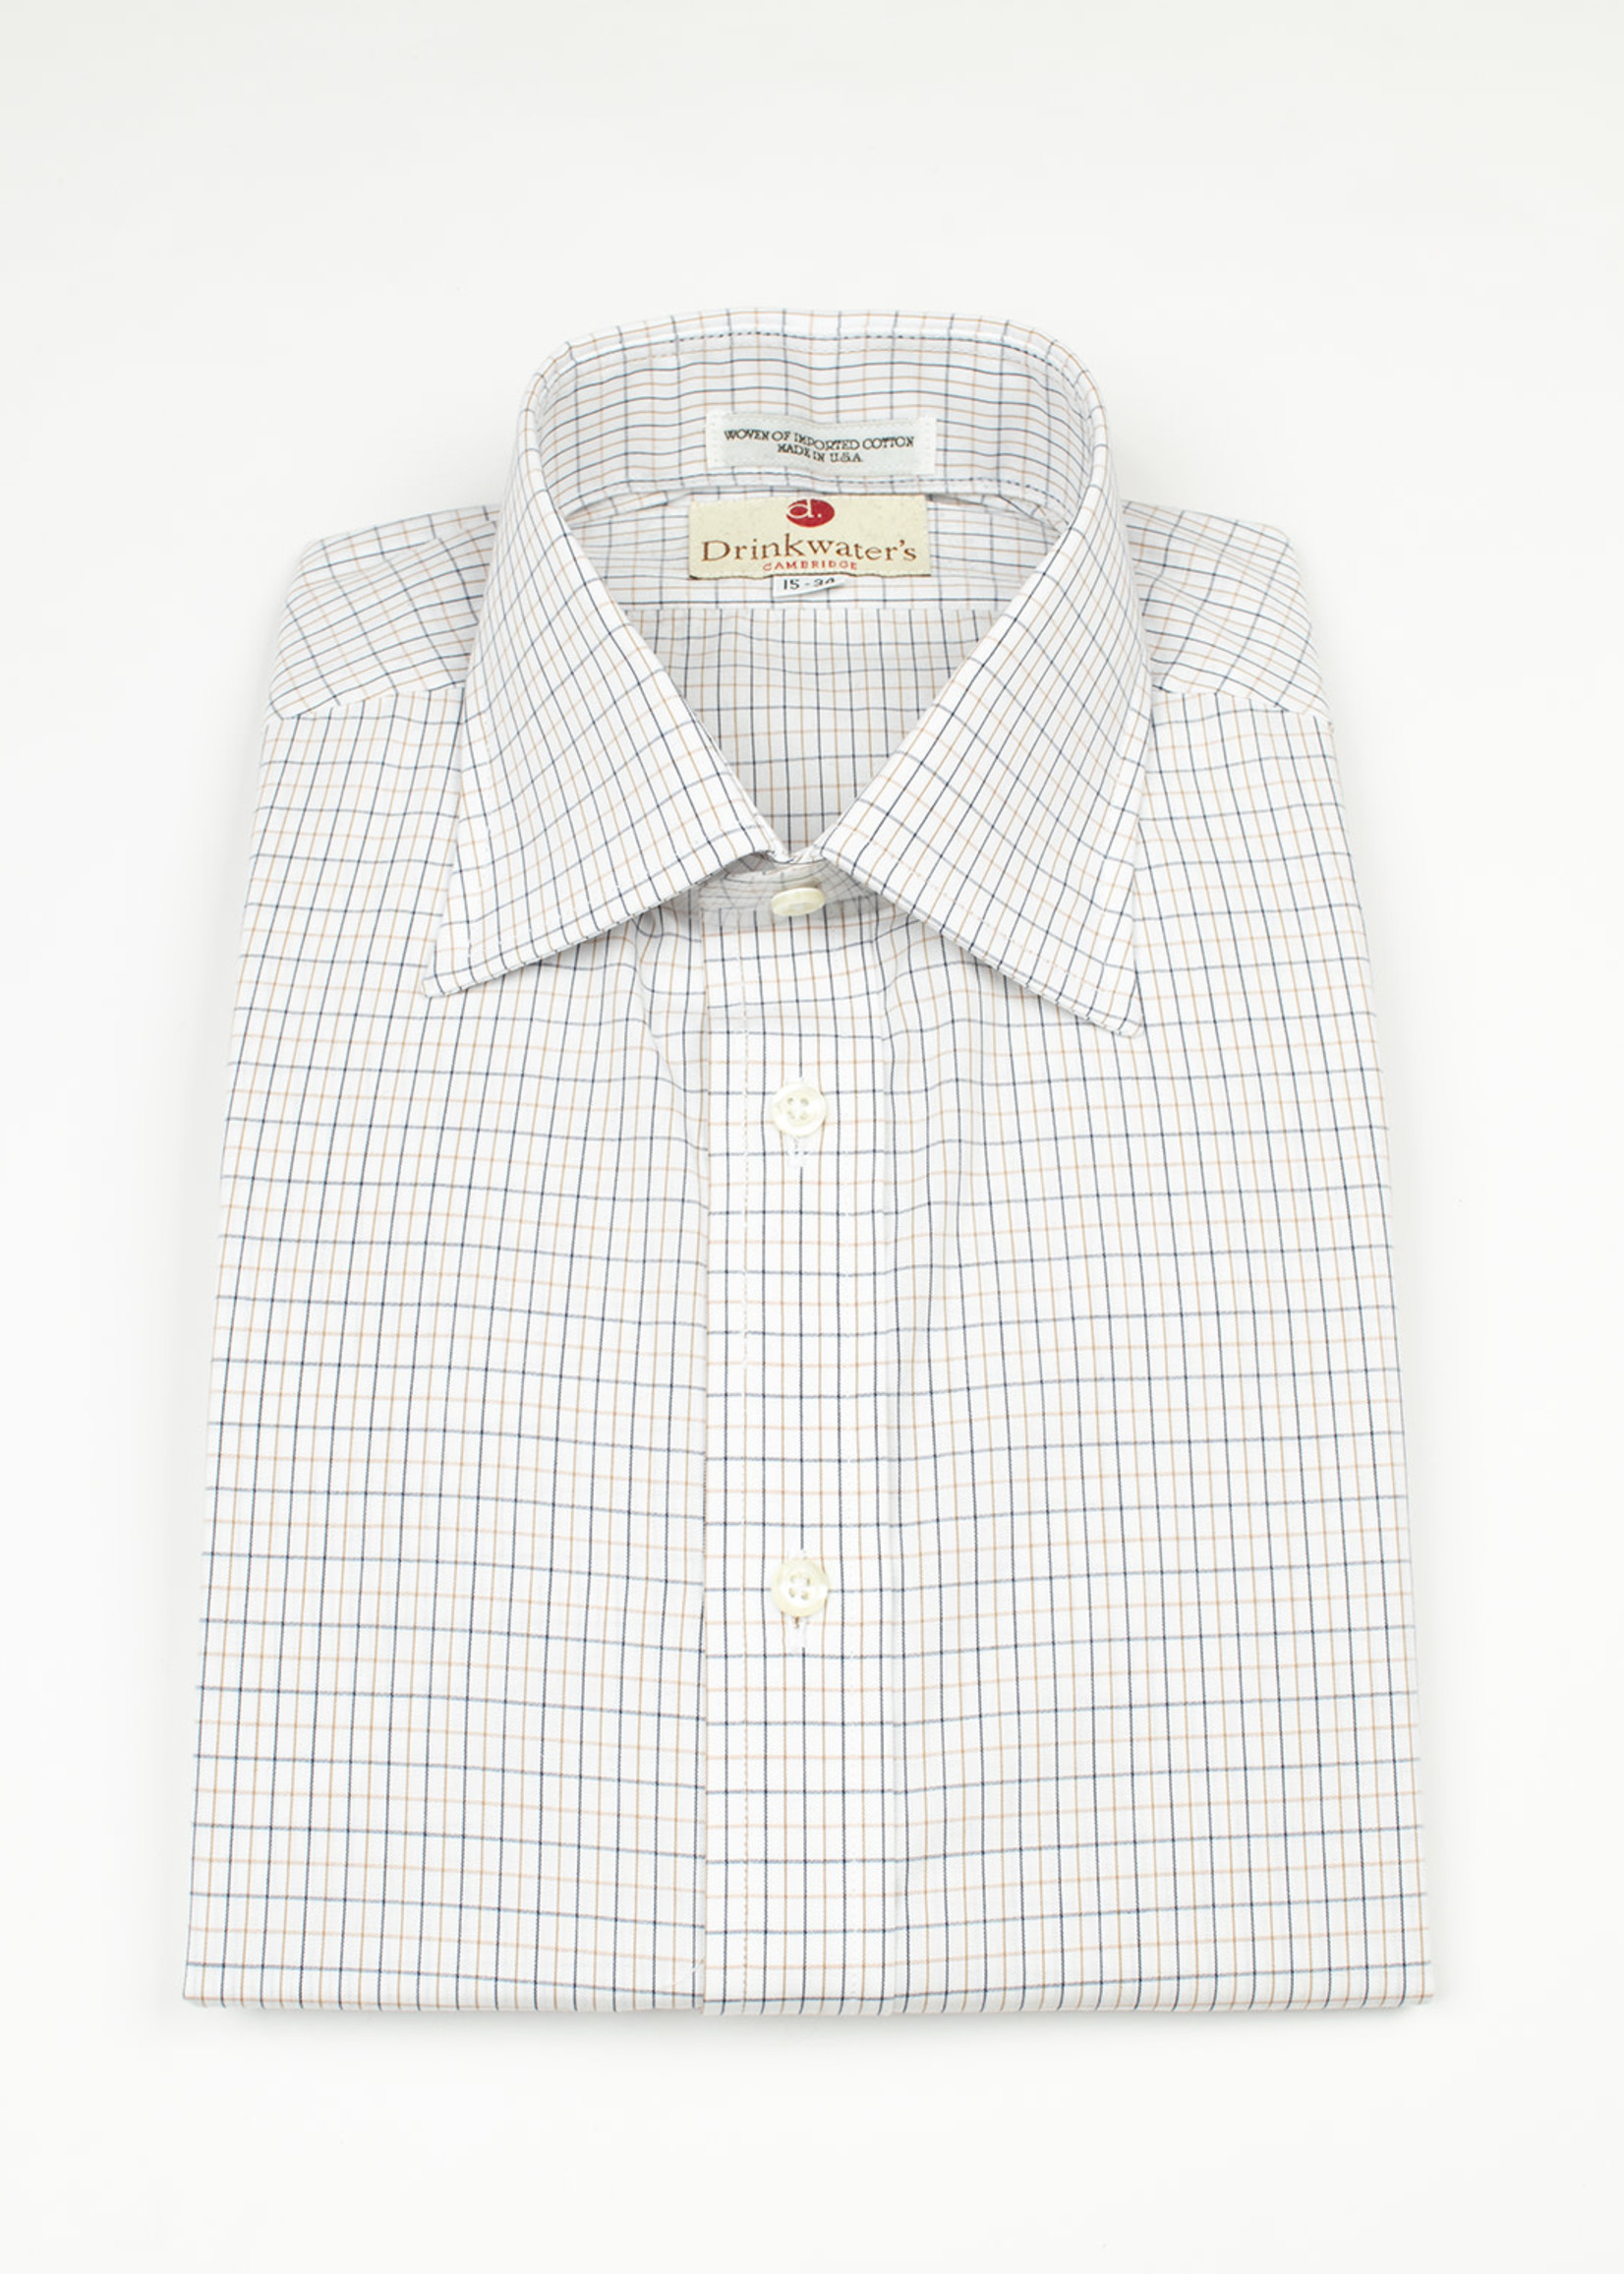 Blue & Tan Tattersall Spread Collar by Drinkwater's